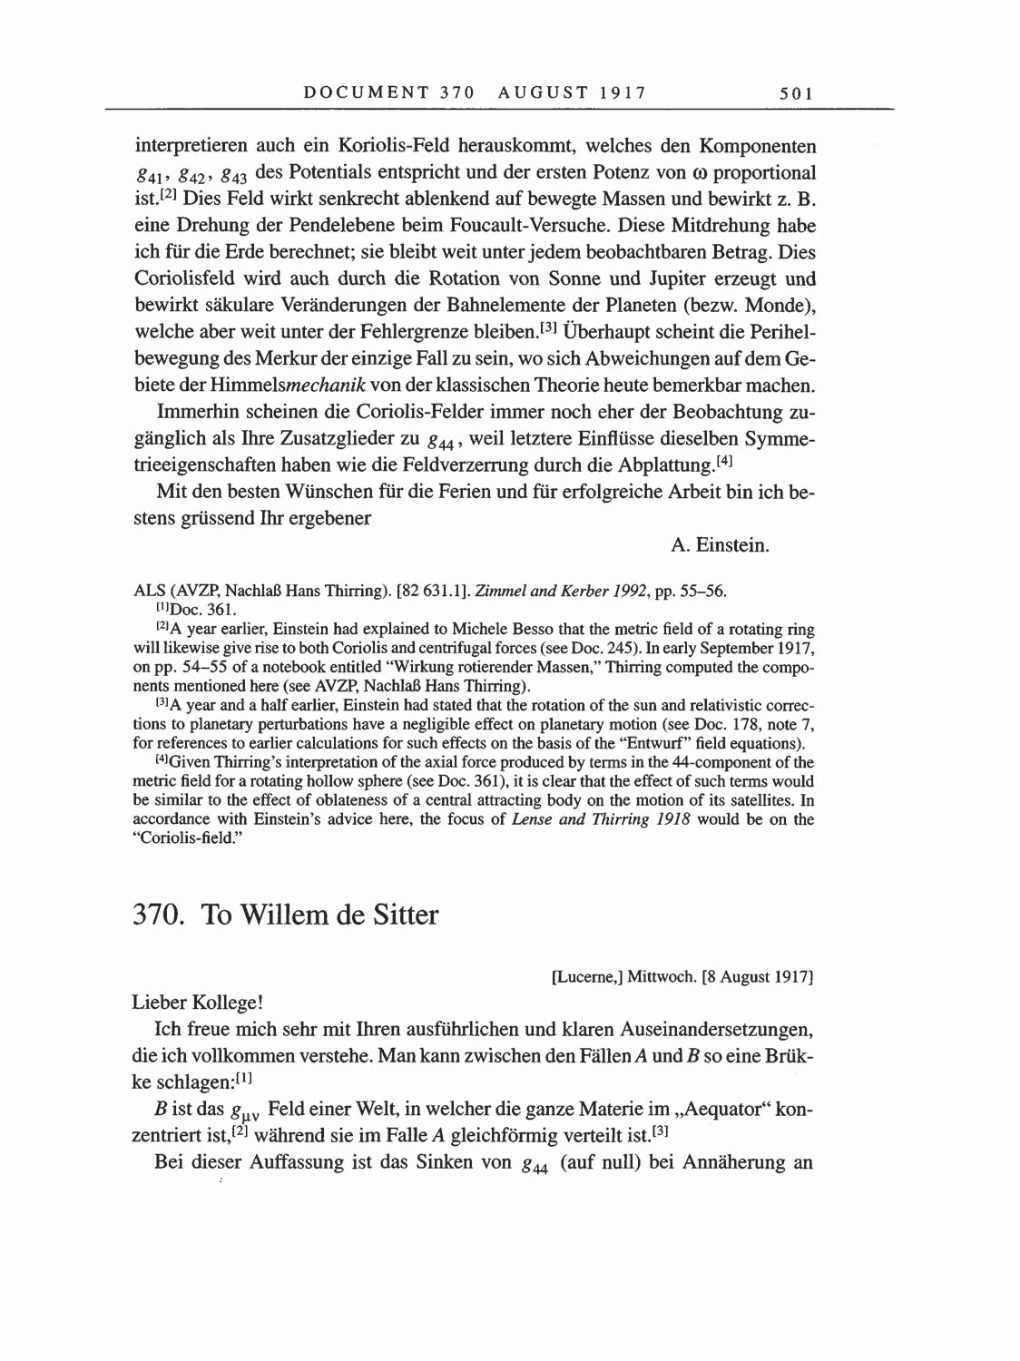 Volume 8, Part A: The Berlin Years: Correspondence 1914-1917 page 501